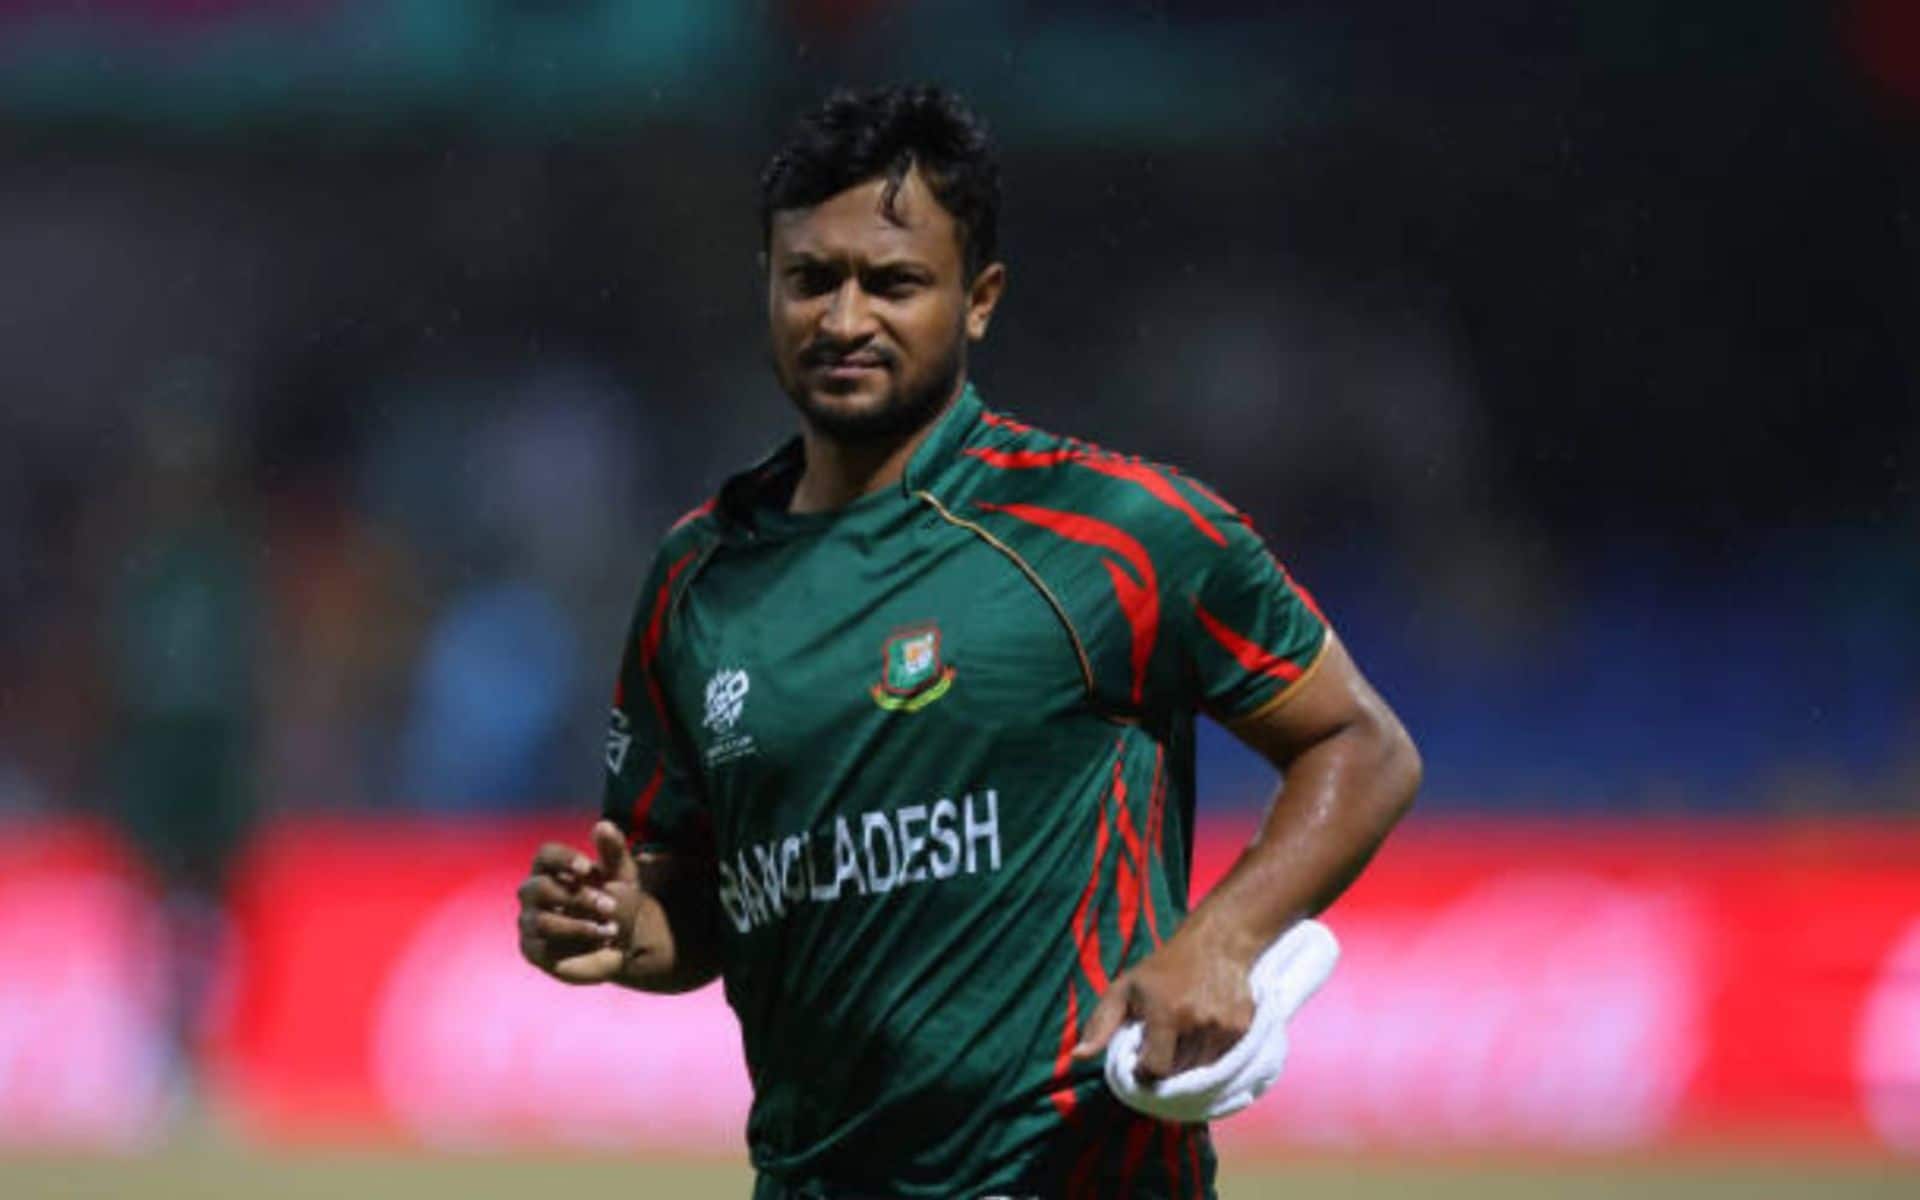 Shakib Al Hasan becomes the first ever player to reach 50 wickets in T20 WCs [X]